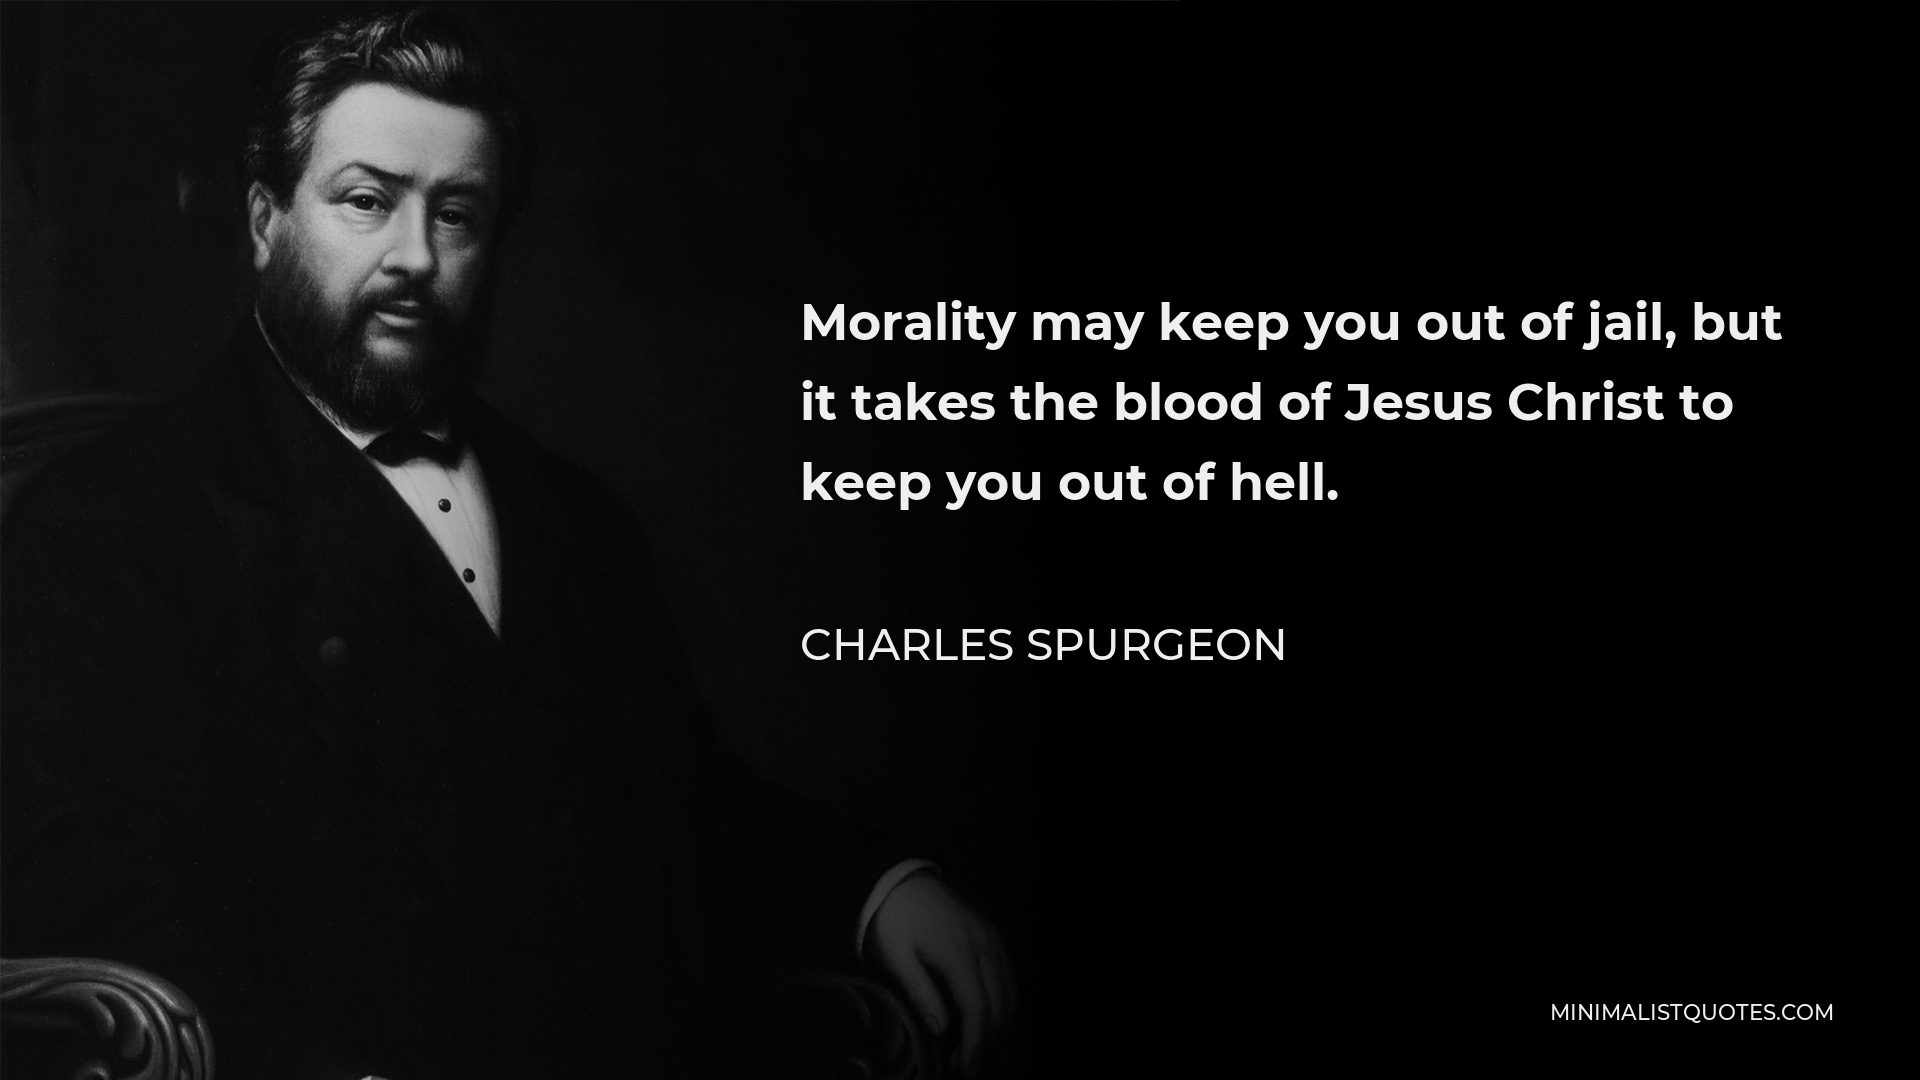 Charles Spurgeon Quote - Morality may keep you out of jail, but it takes the blood of Jesus Christ to keep you out of hell.